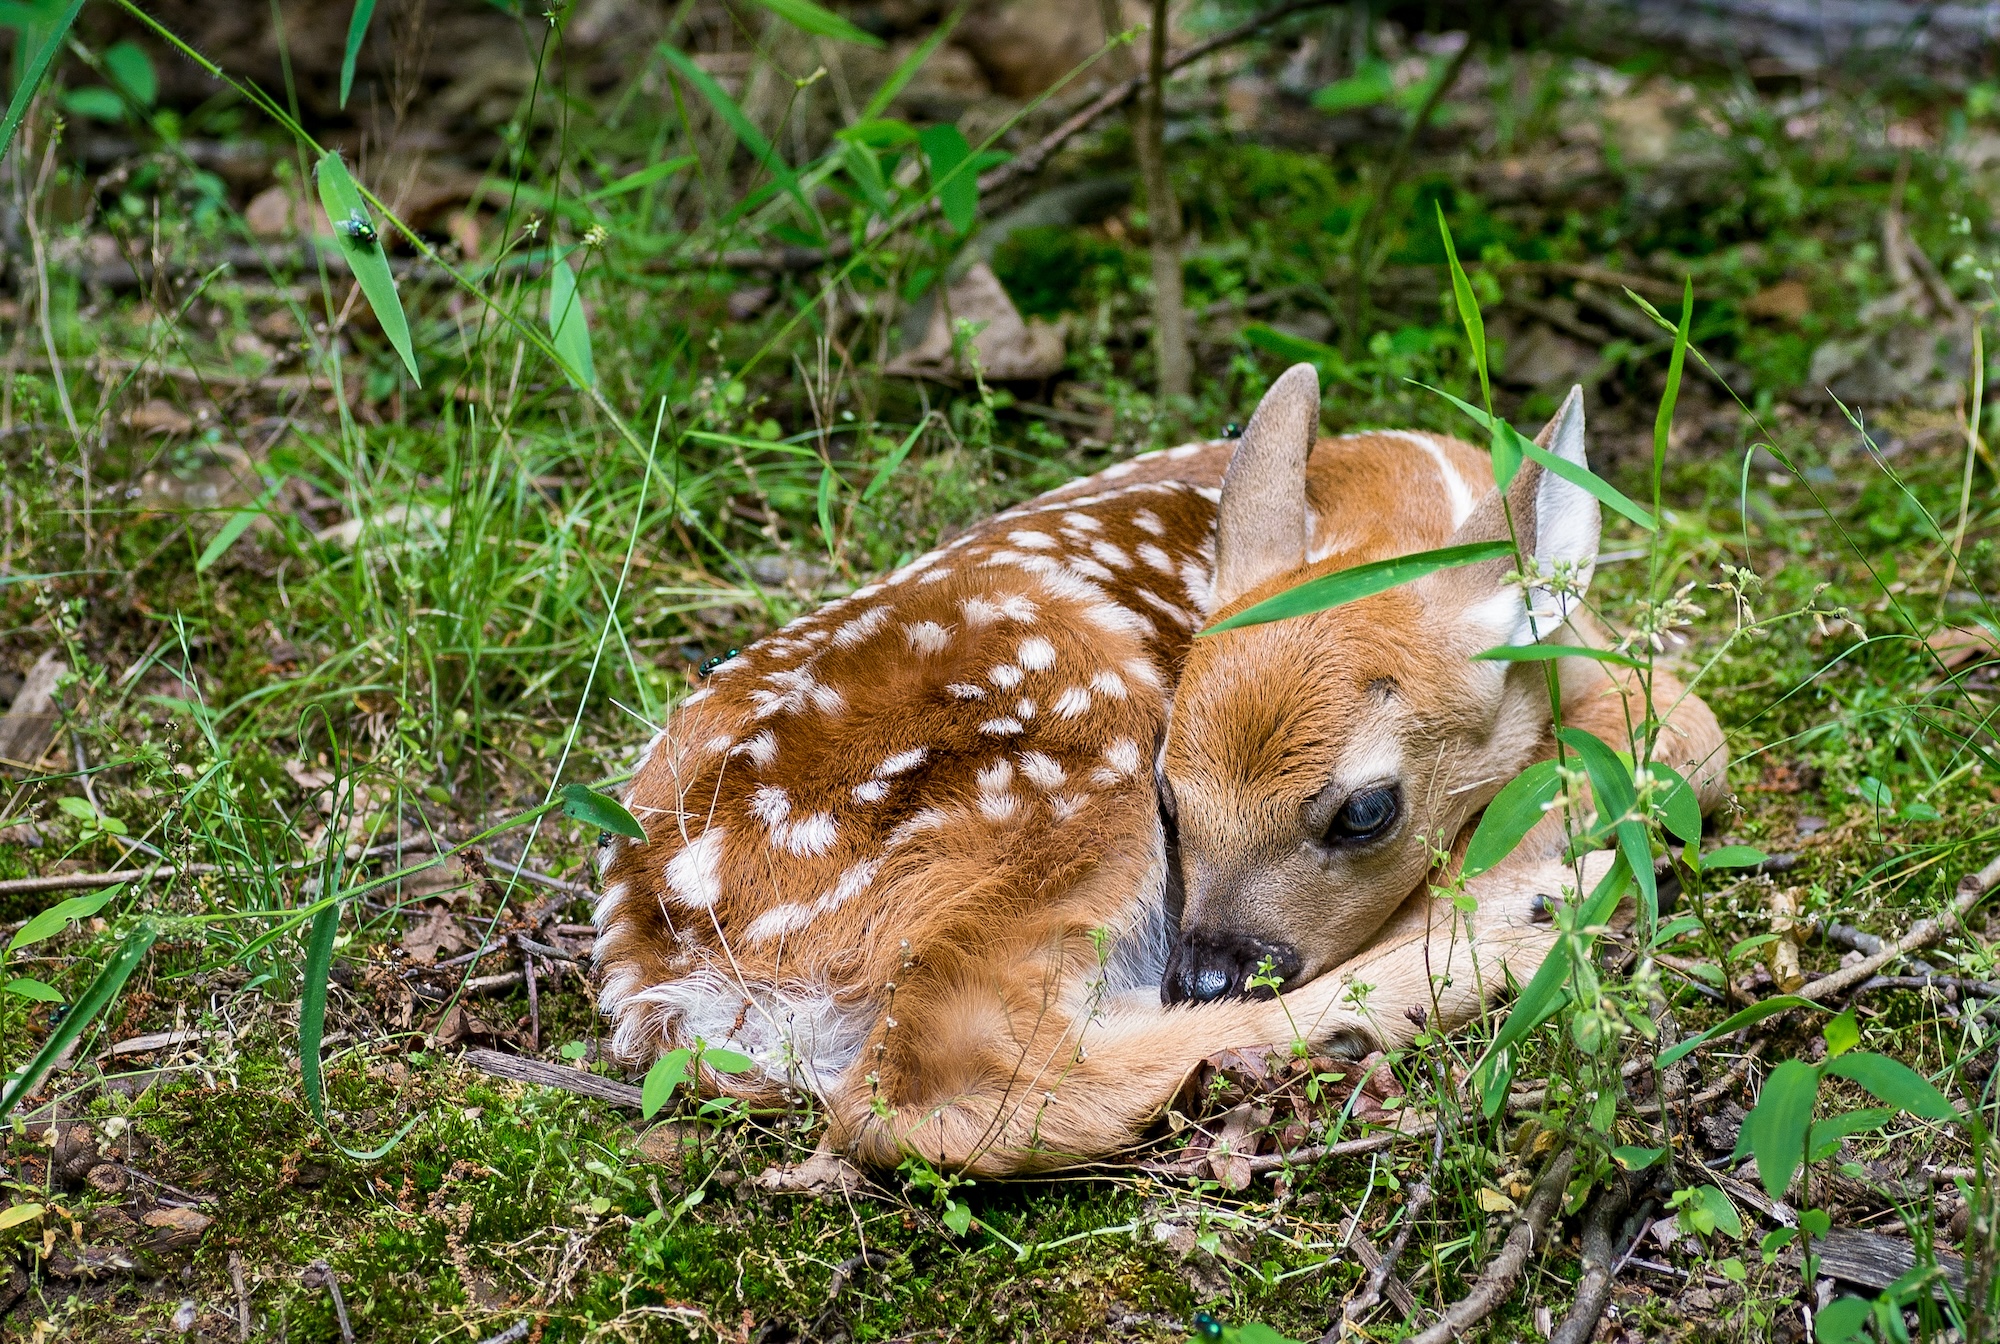 A fawn waiting for its mother to return.